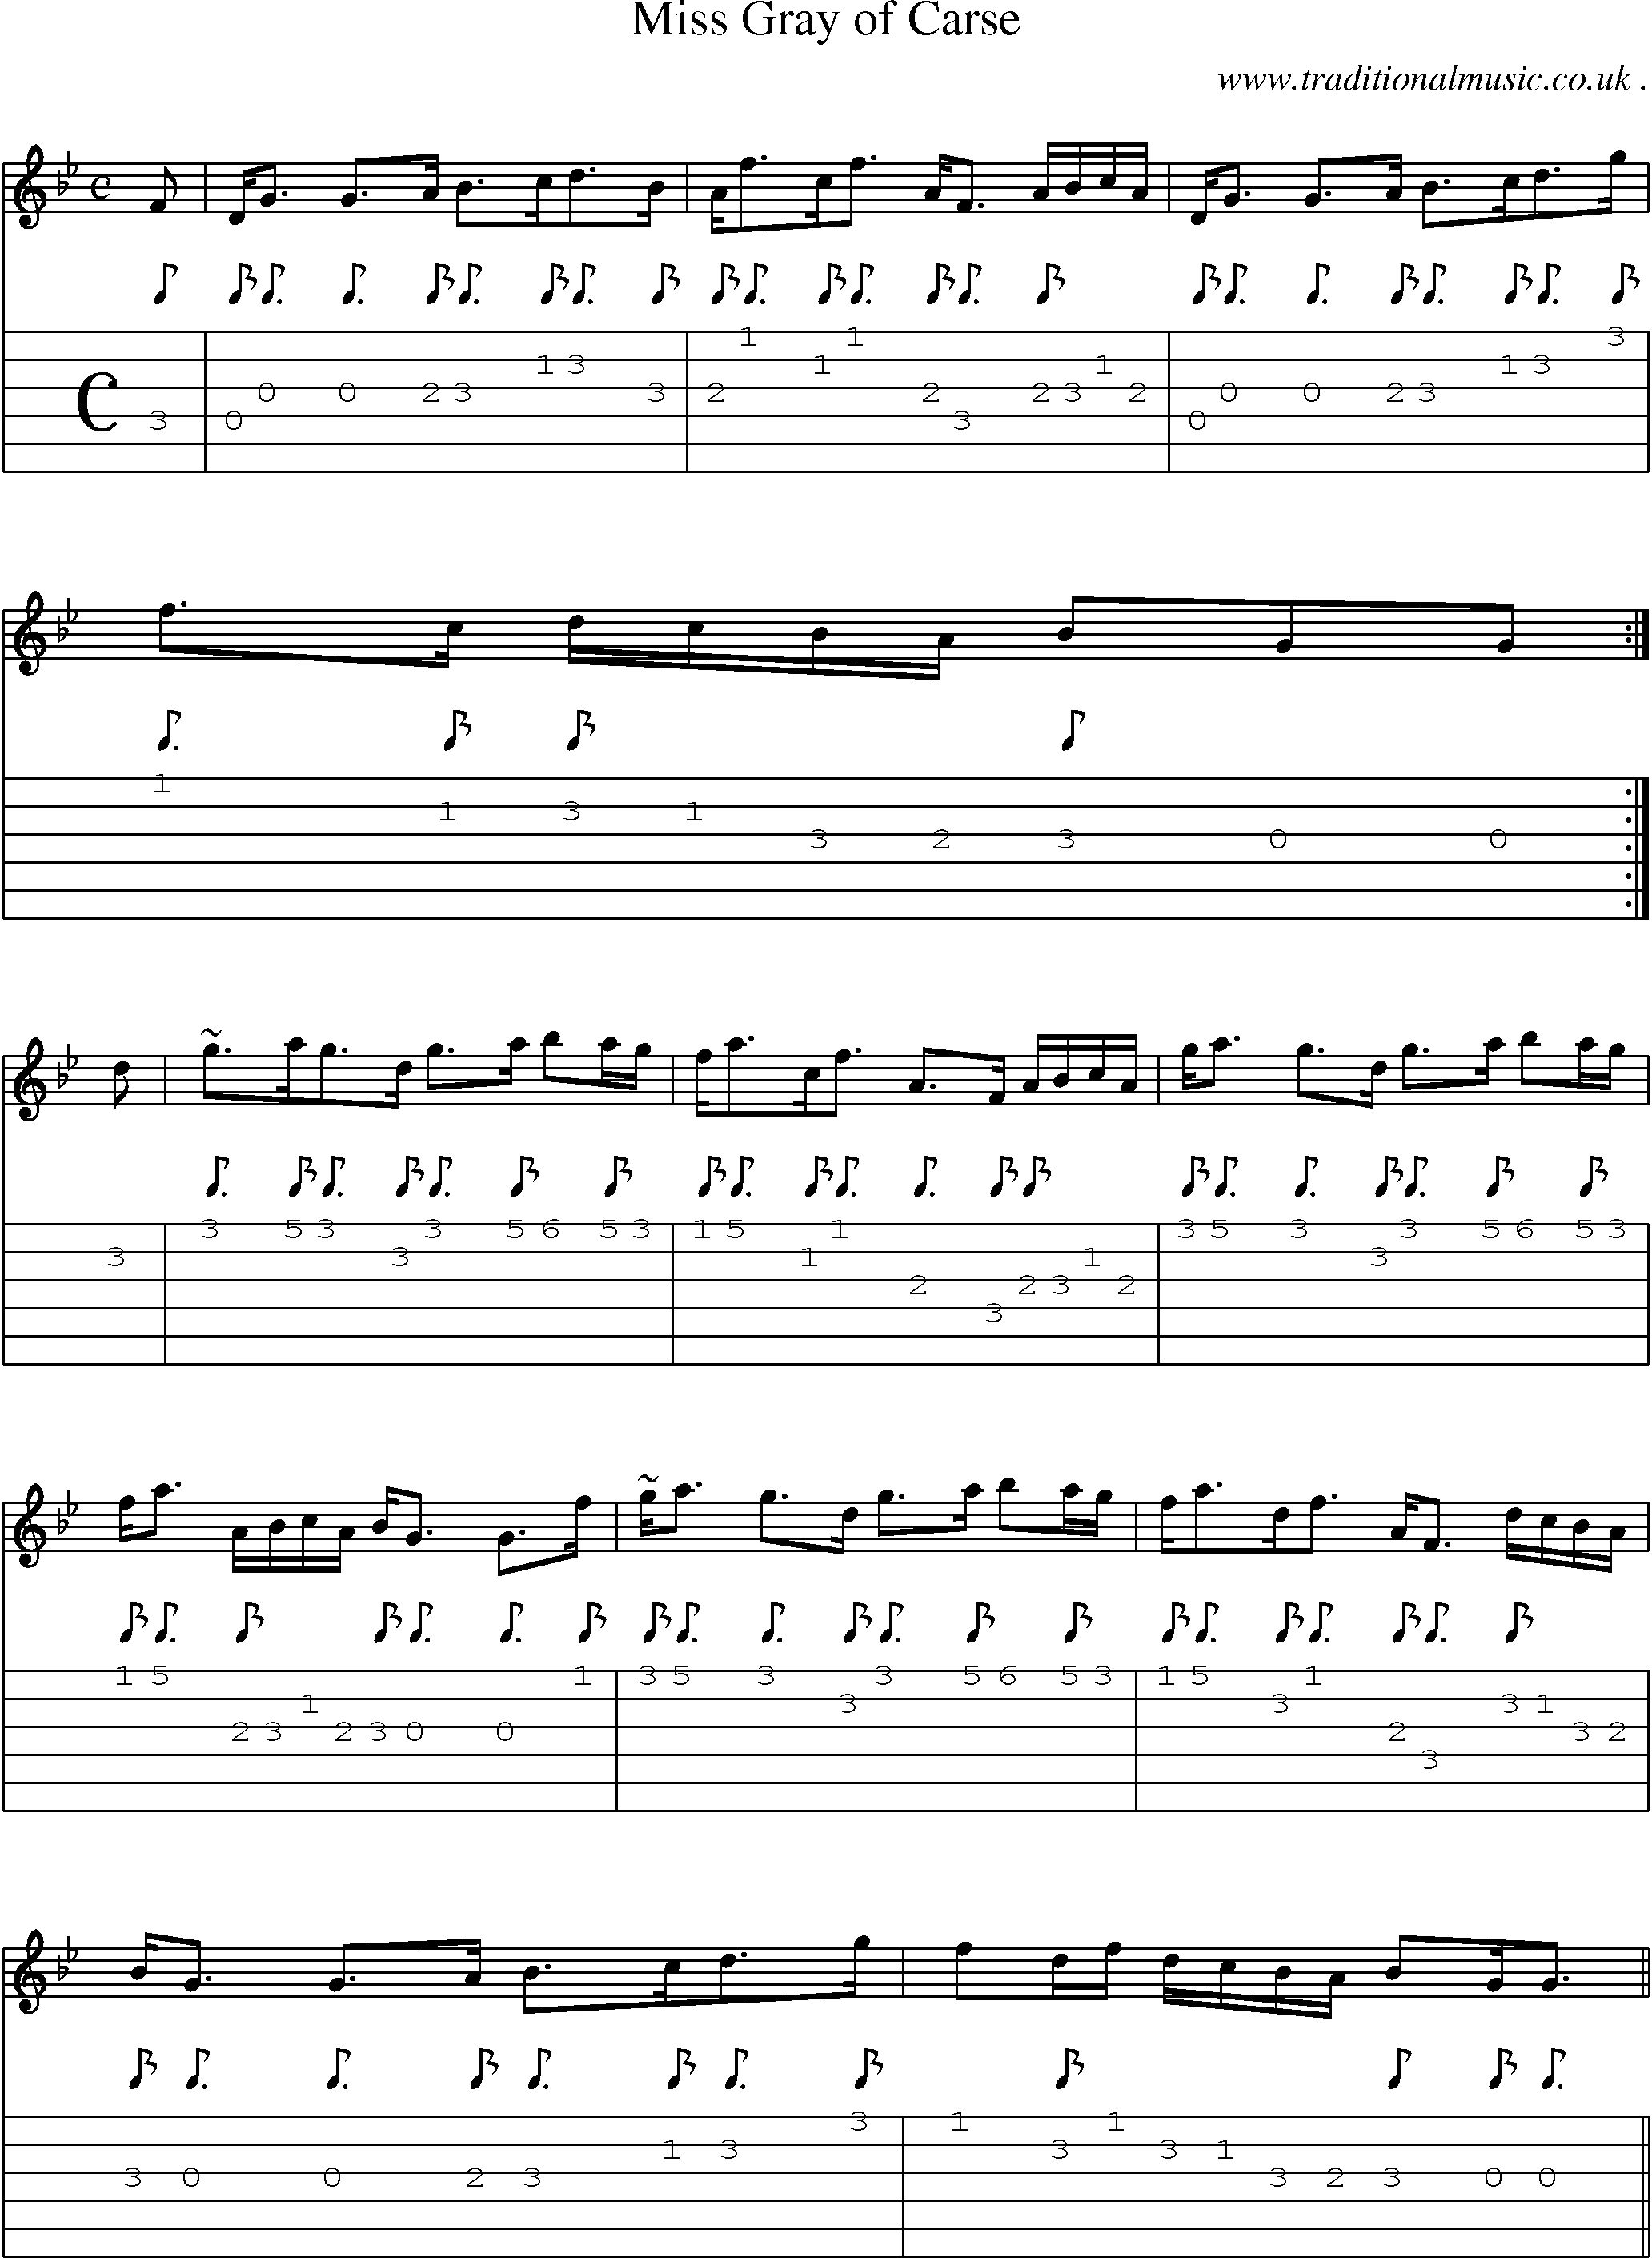 Sheet-music  score, Chords and Guitar Tabs for Miss Gray Of Carse